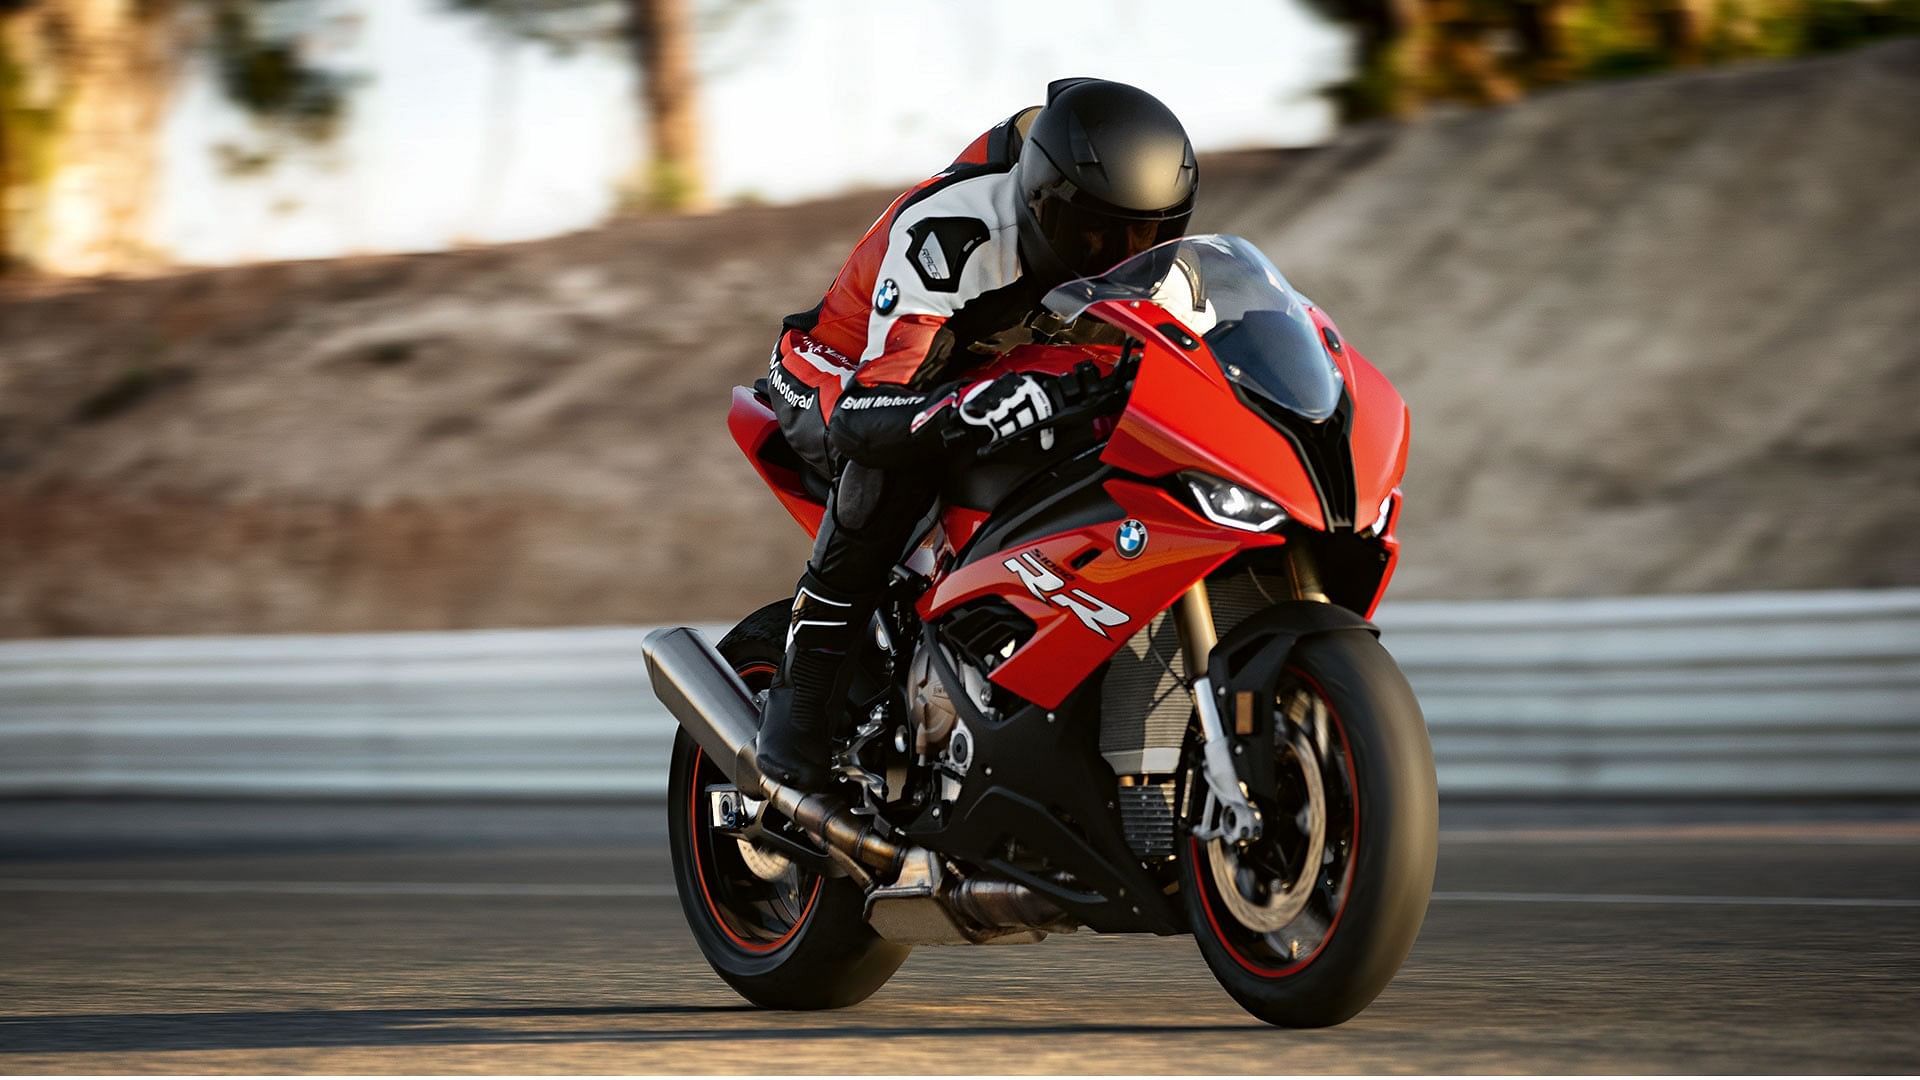 Bmw S1000rr Price In India Bmw S1000rr Has Launched Its 999 Cc Supersport Motorcycle In India Specification And Features Compared